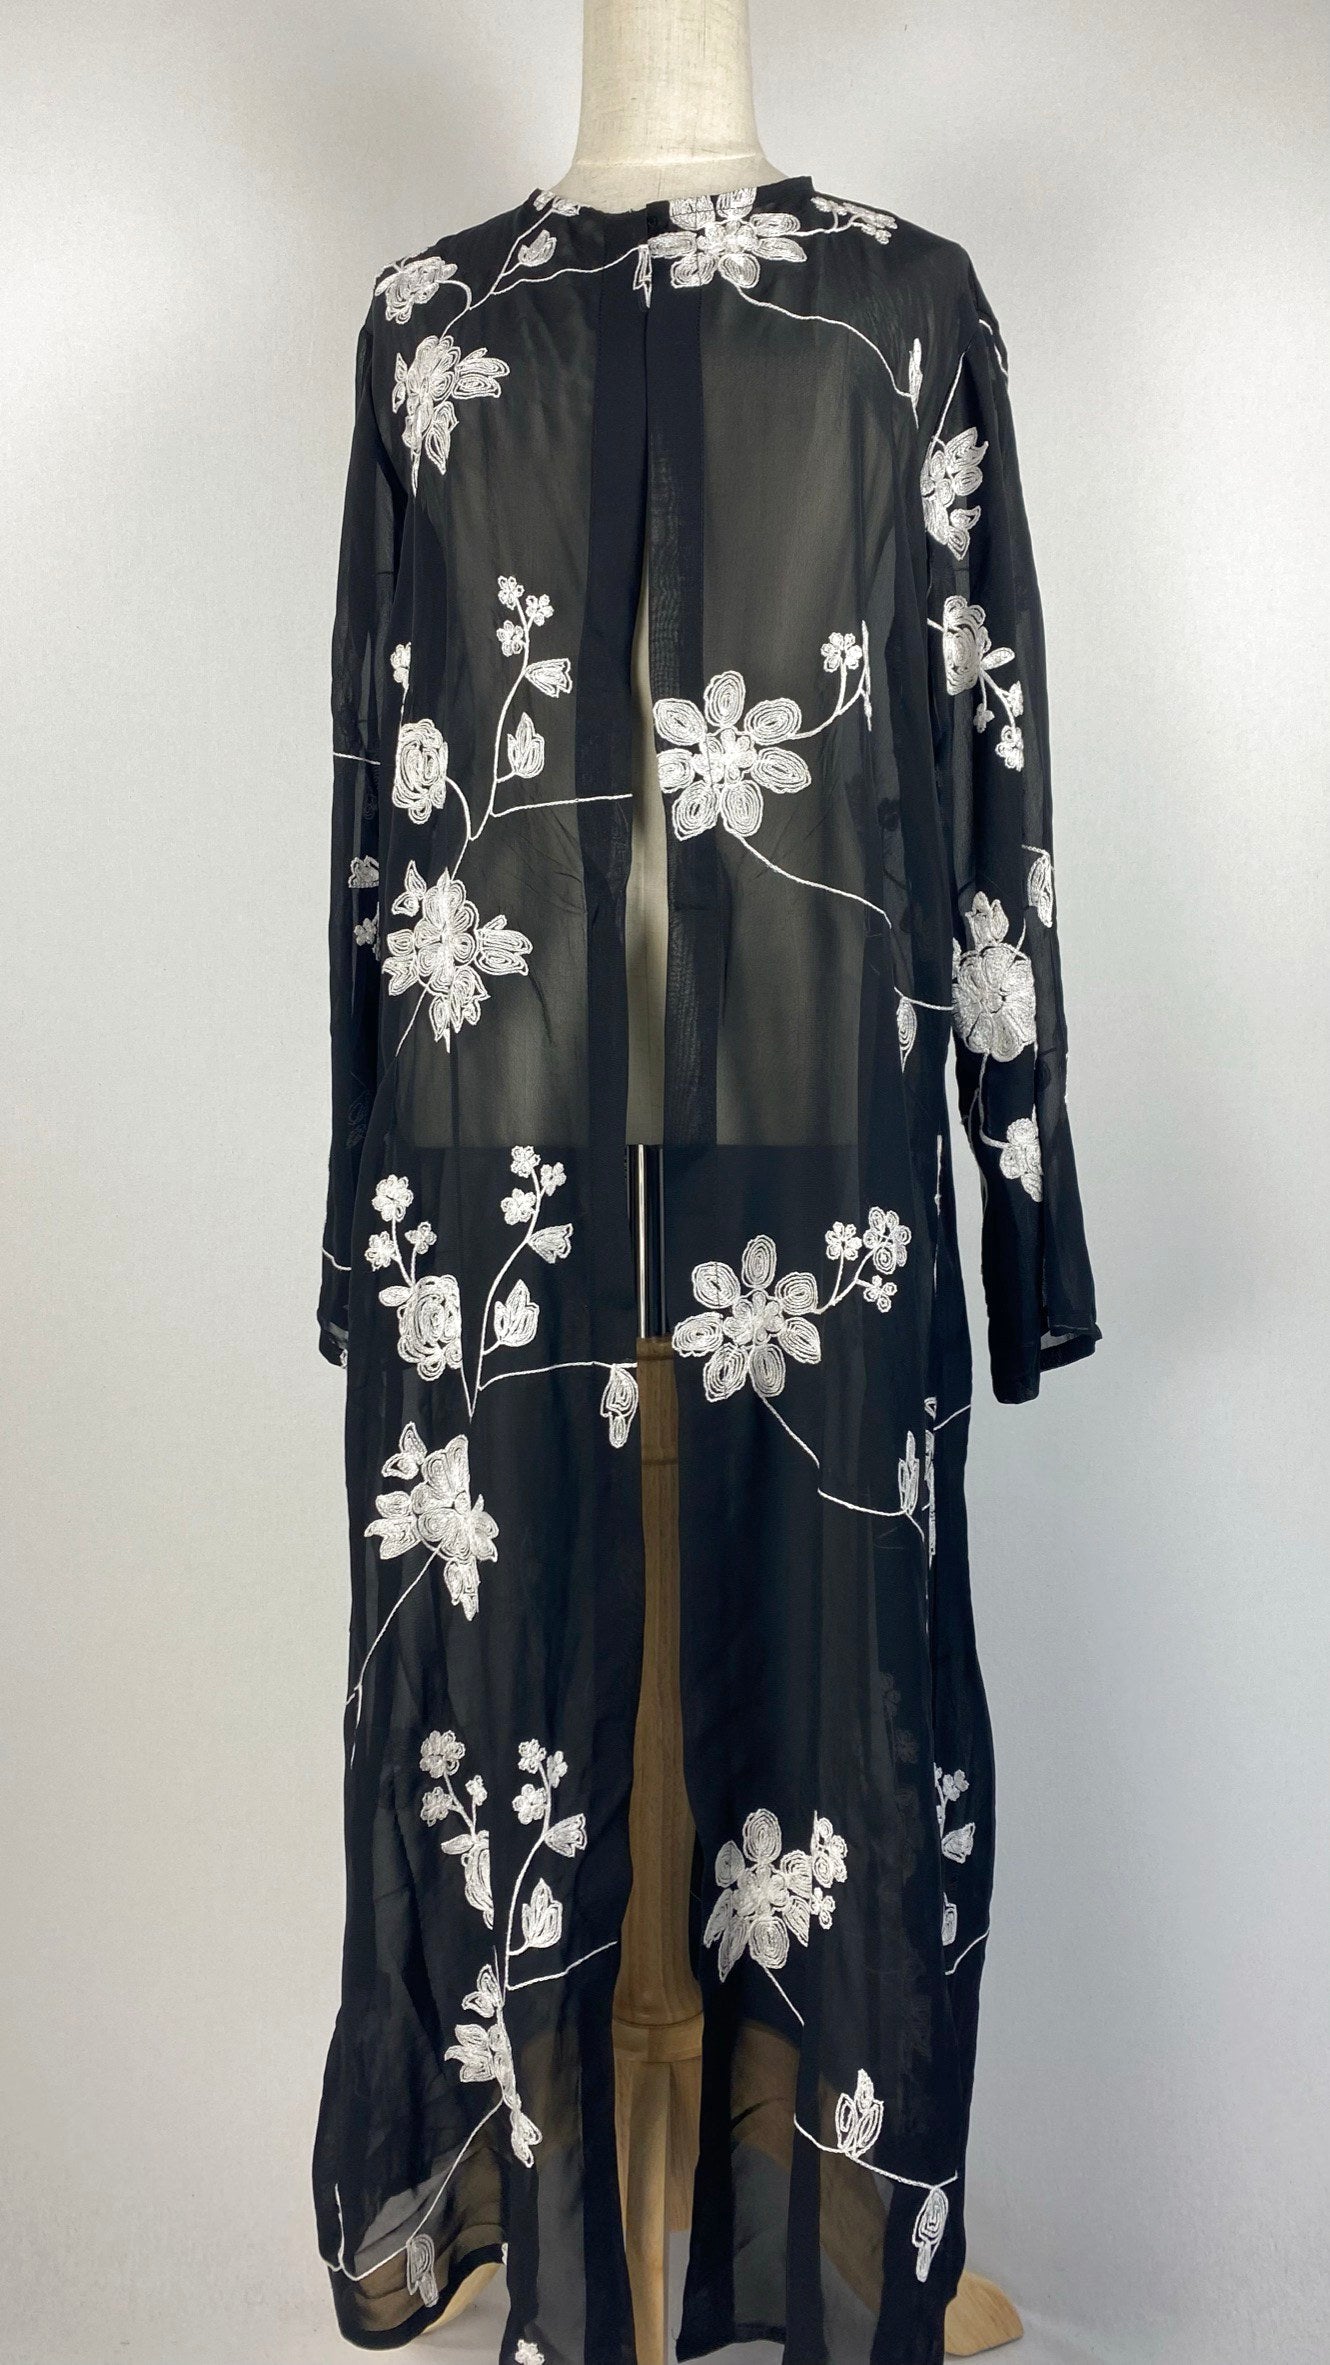 Black Sheer Open Shirt/Cardigan with White Embroidered Flowers